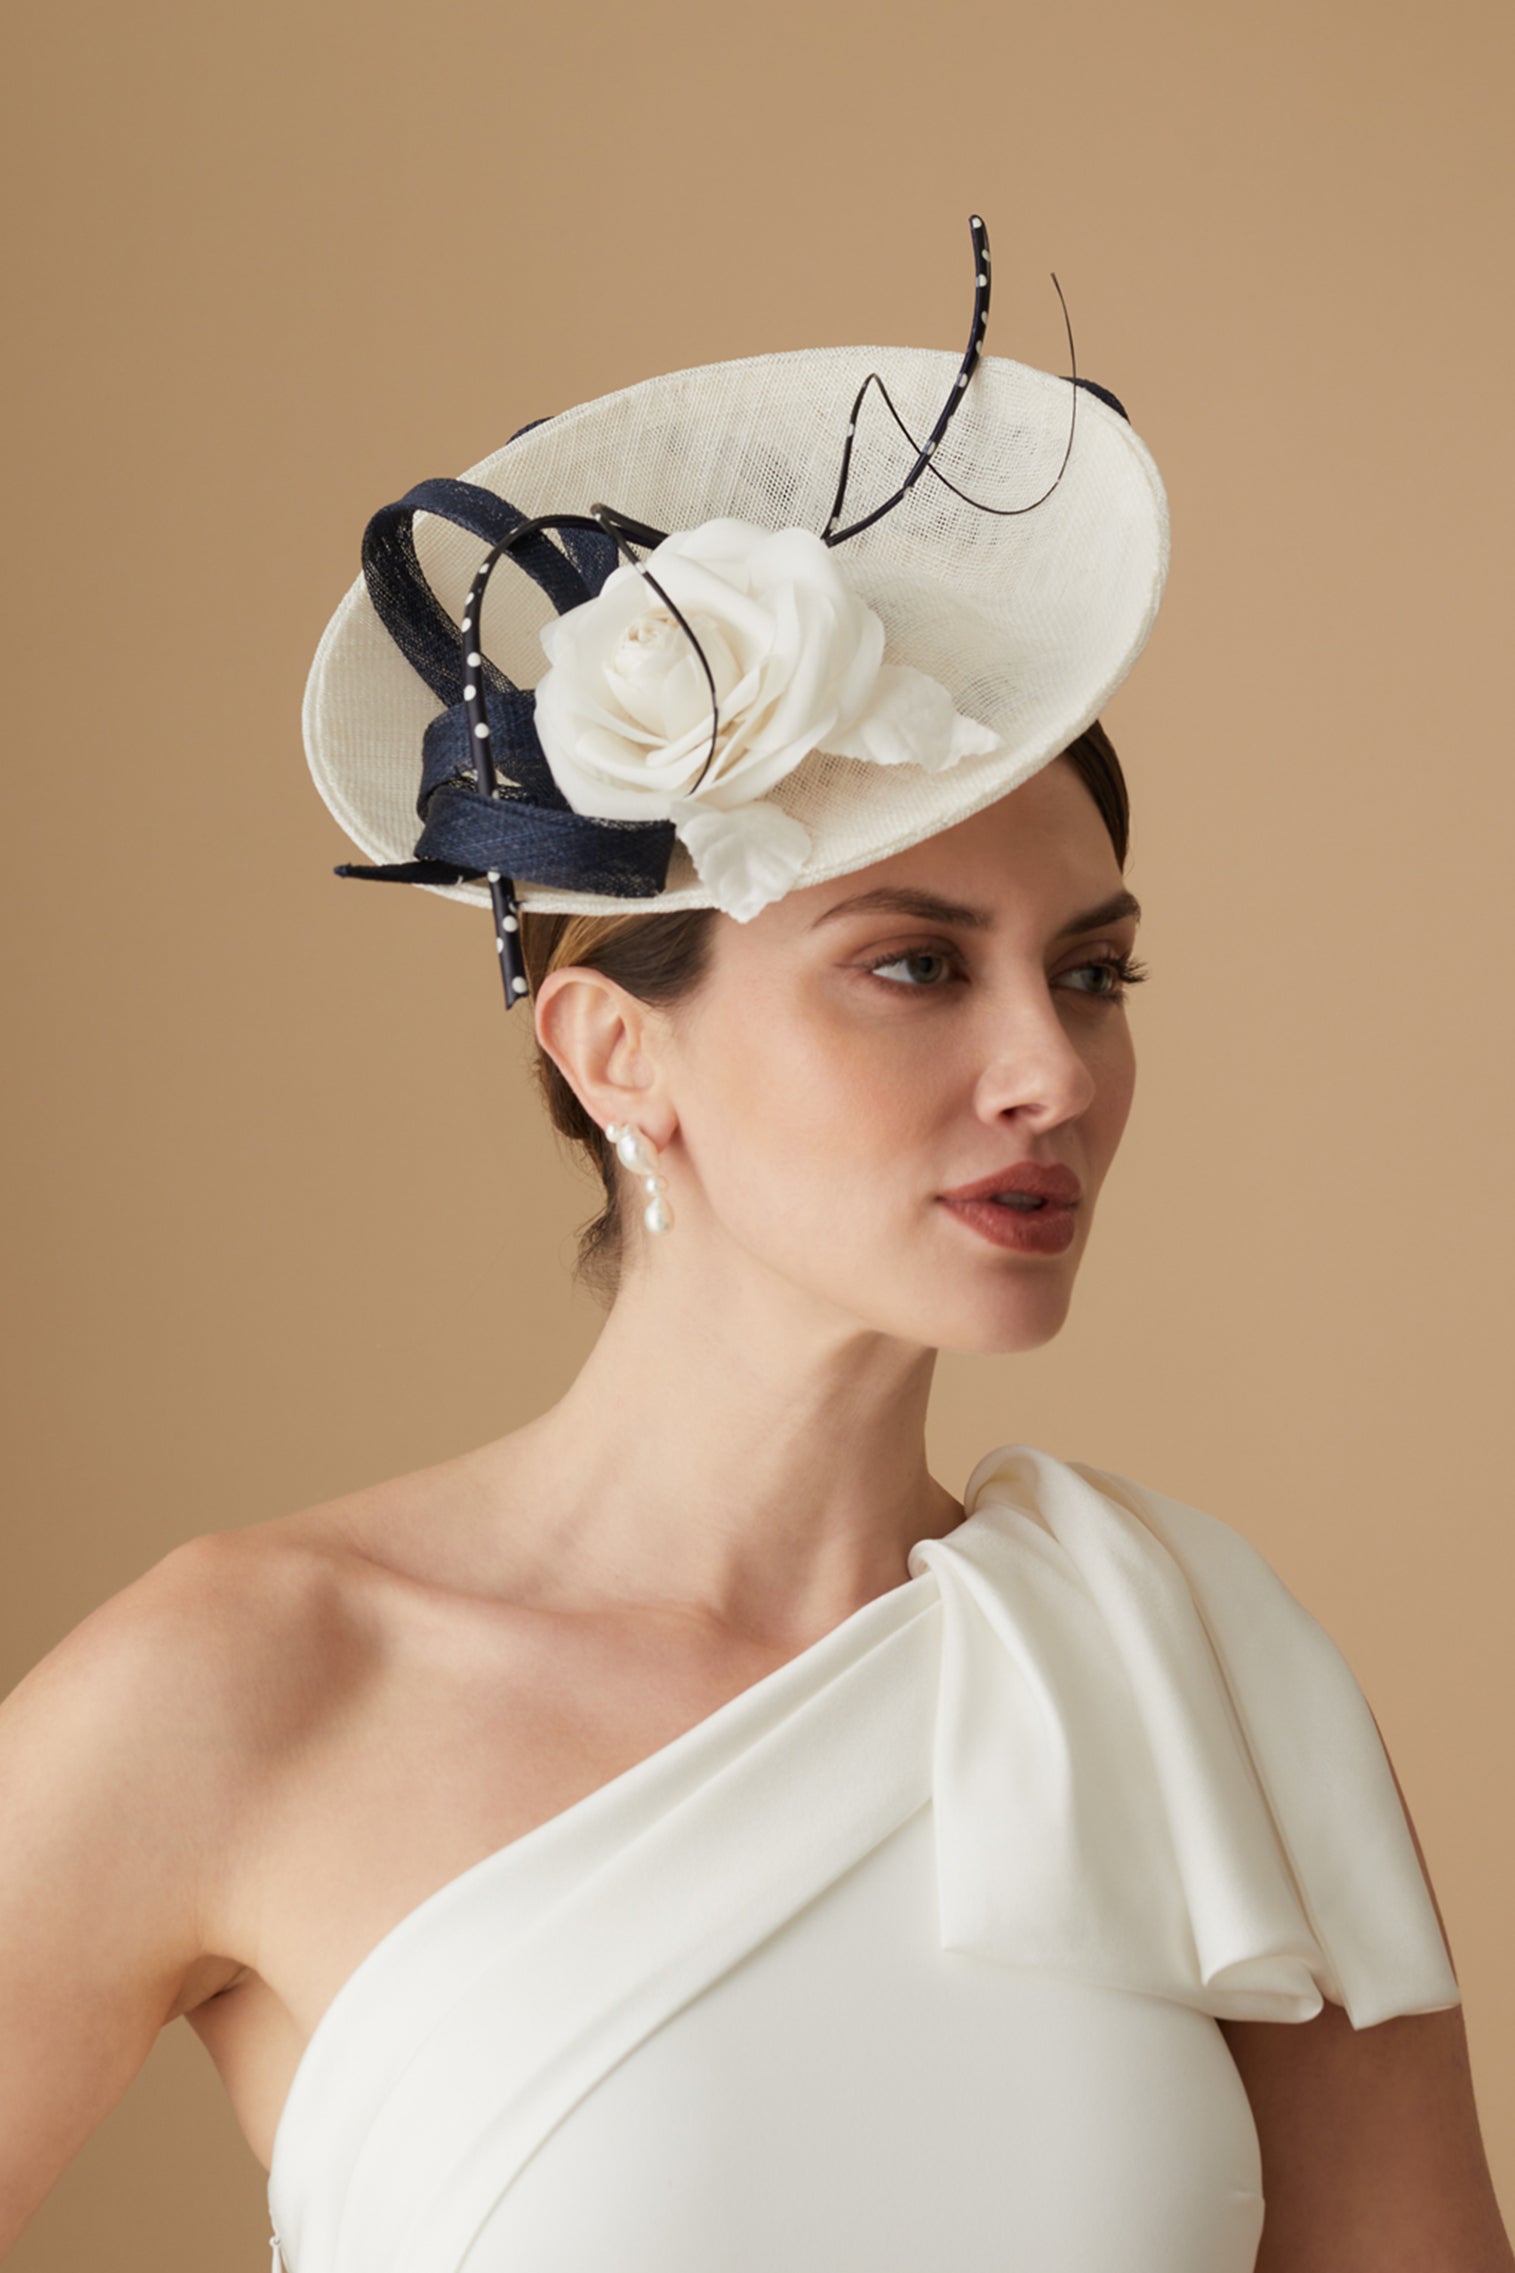 Assam White and Navy Saucer Hat - Lock Couture by Awon Golding - Lock & Co. Hatters London UK